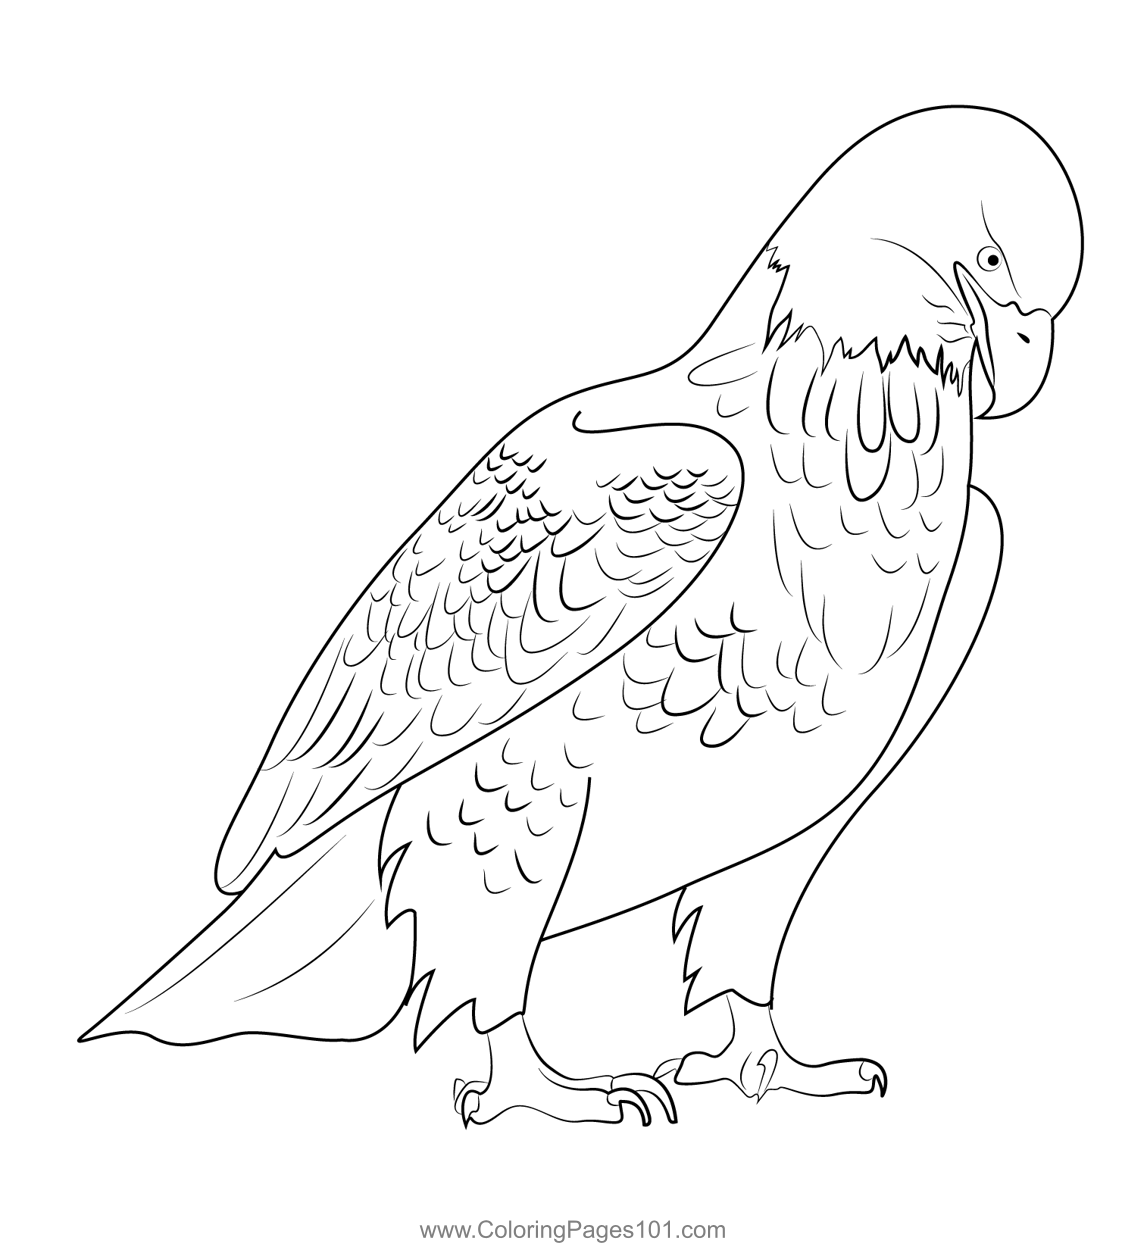 Bald Eagle 3 Coloring Page for Kids - Free Hawks and Eagles Printable ...